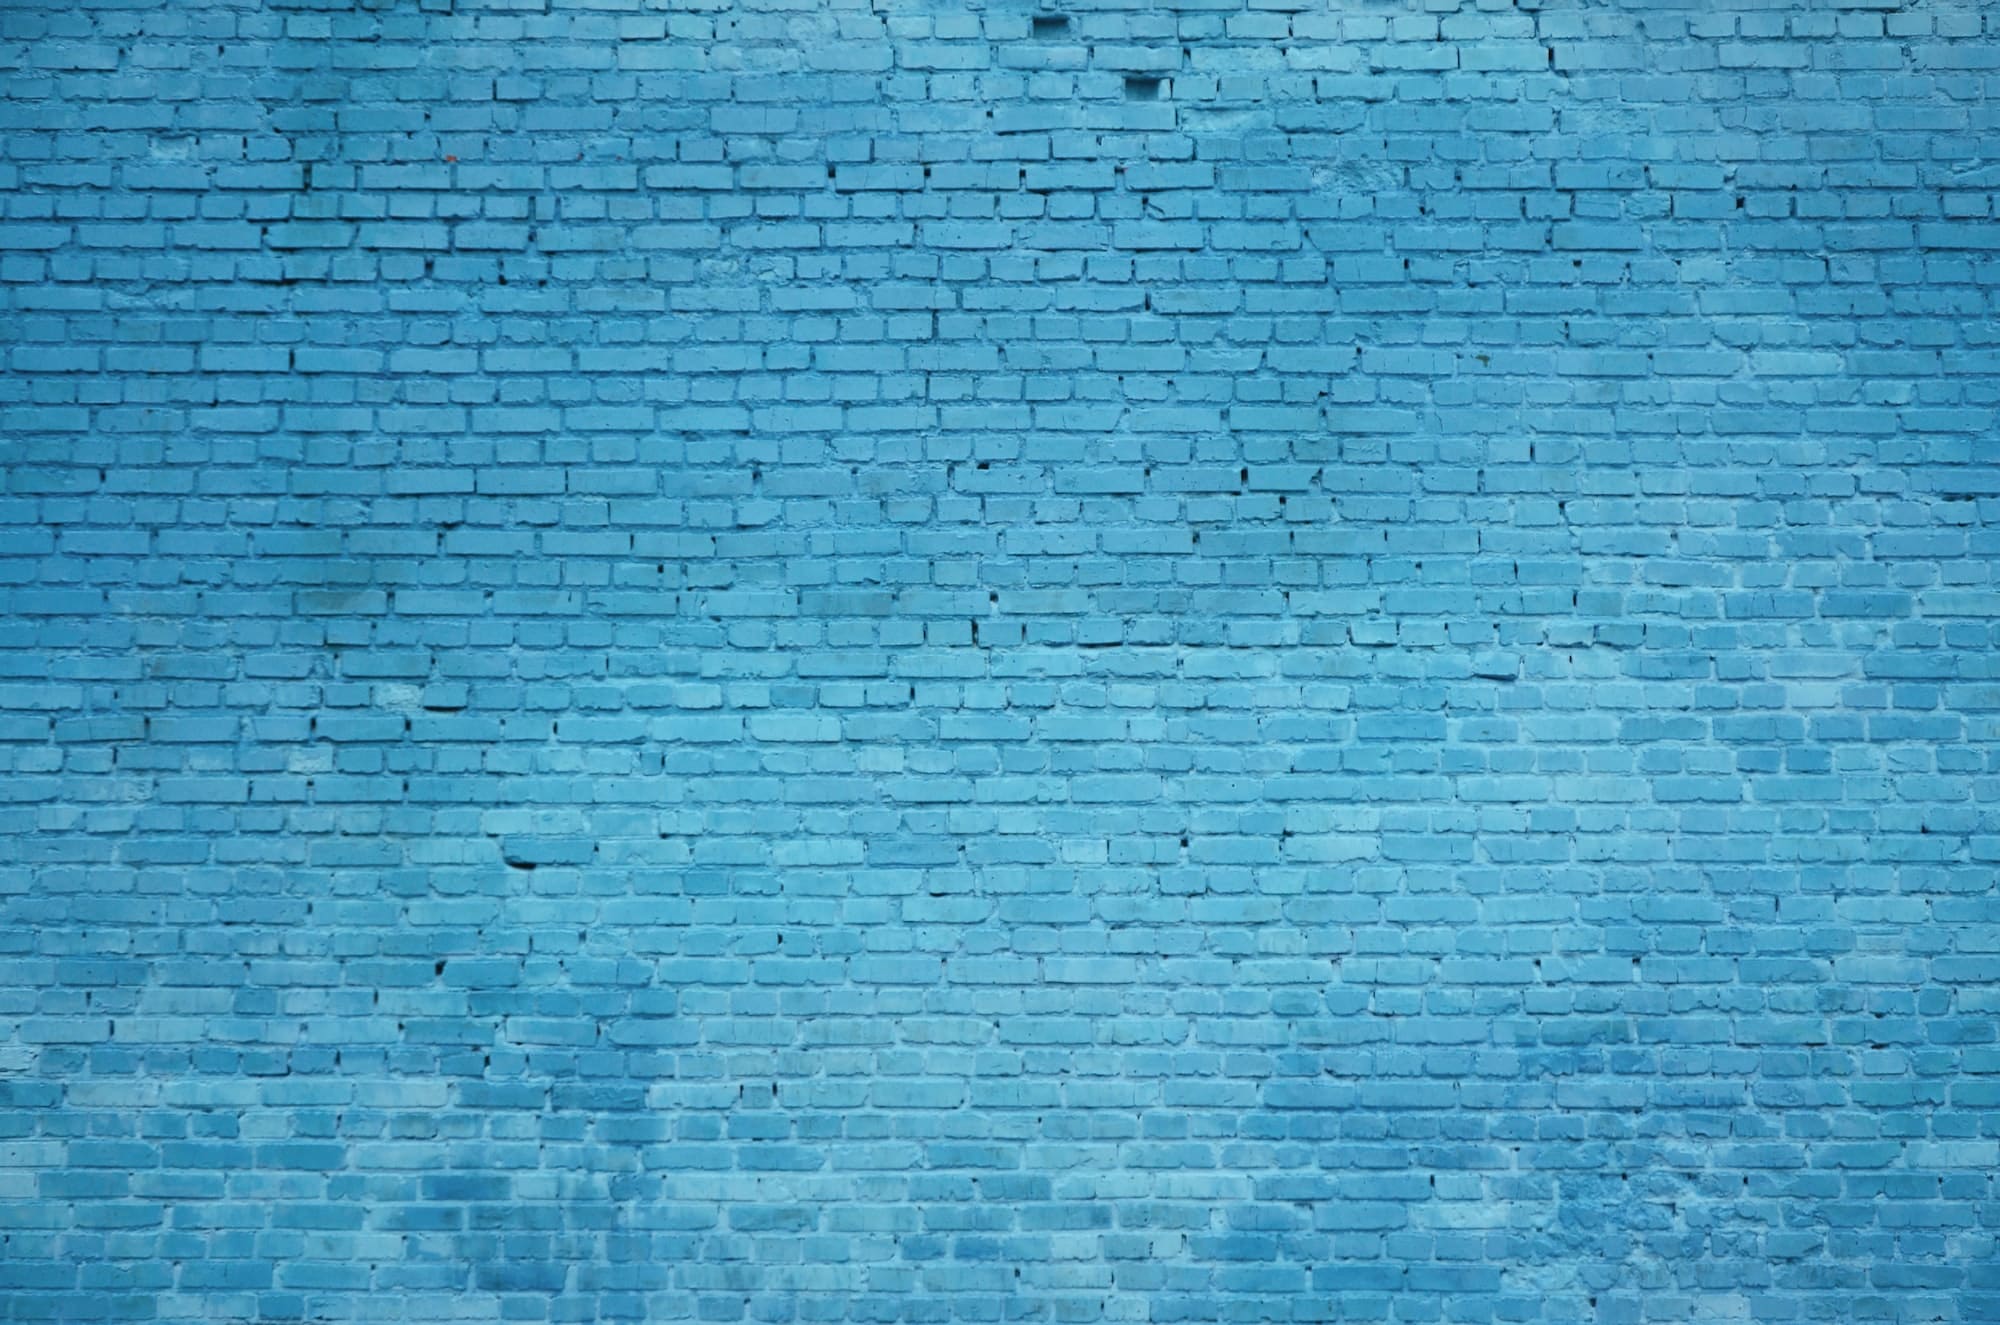 The texture of the brick wall of many rows of bricks painted in blue color